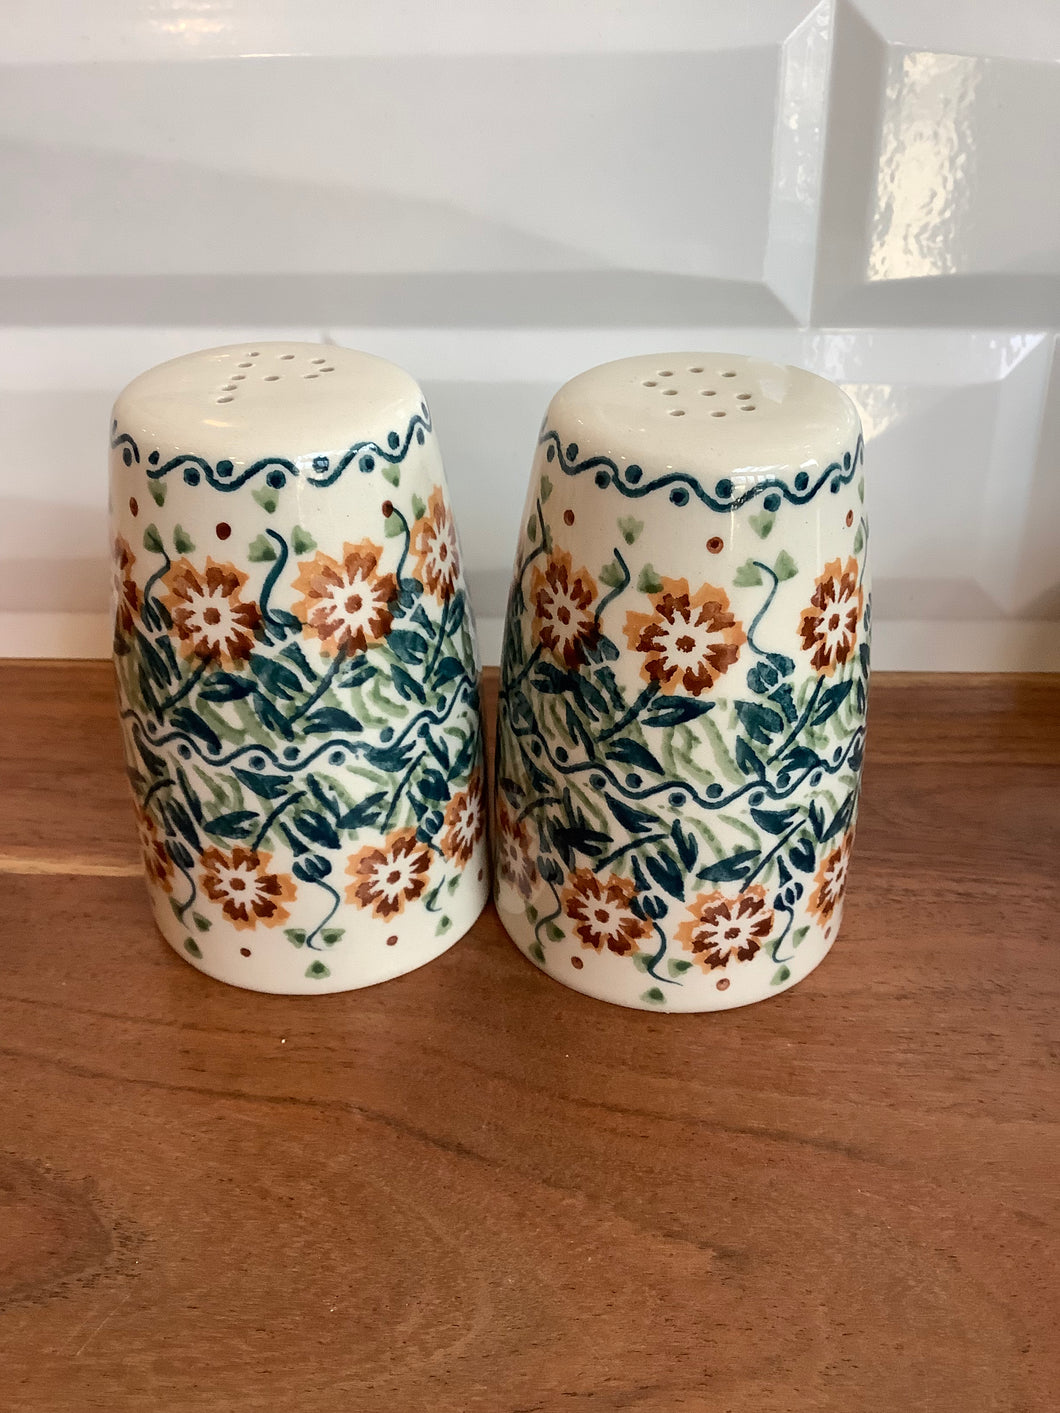 Tuscany Salt and Pepper Shakers